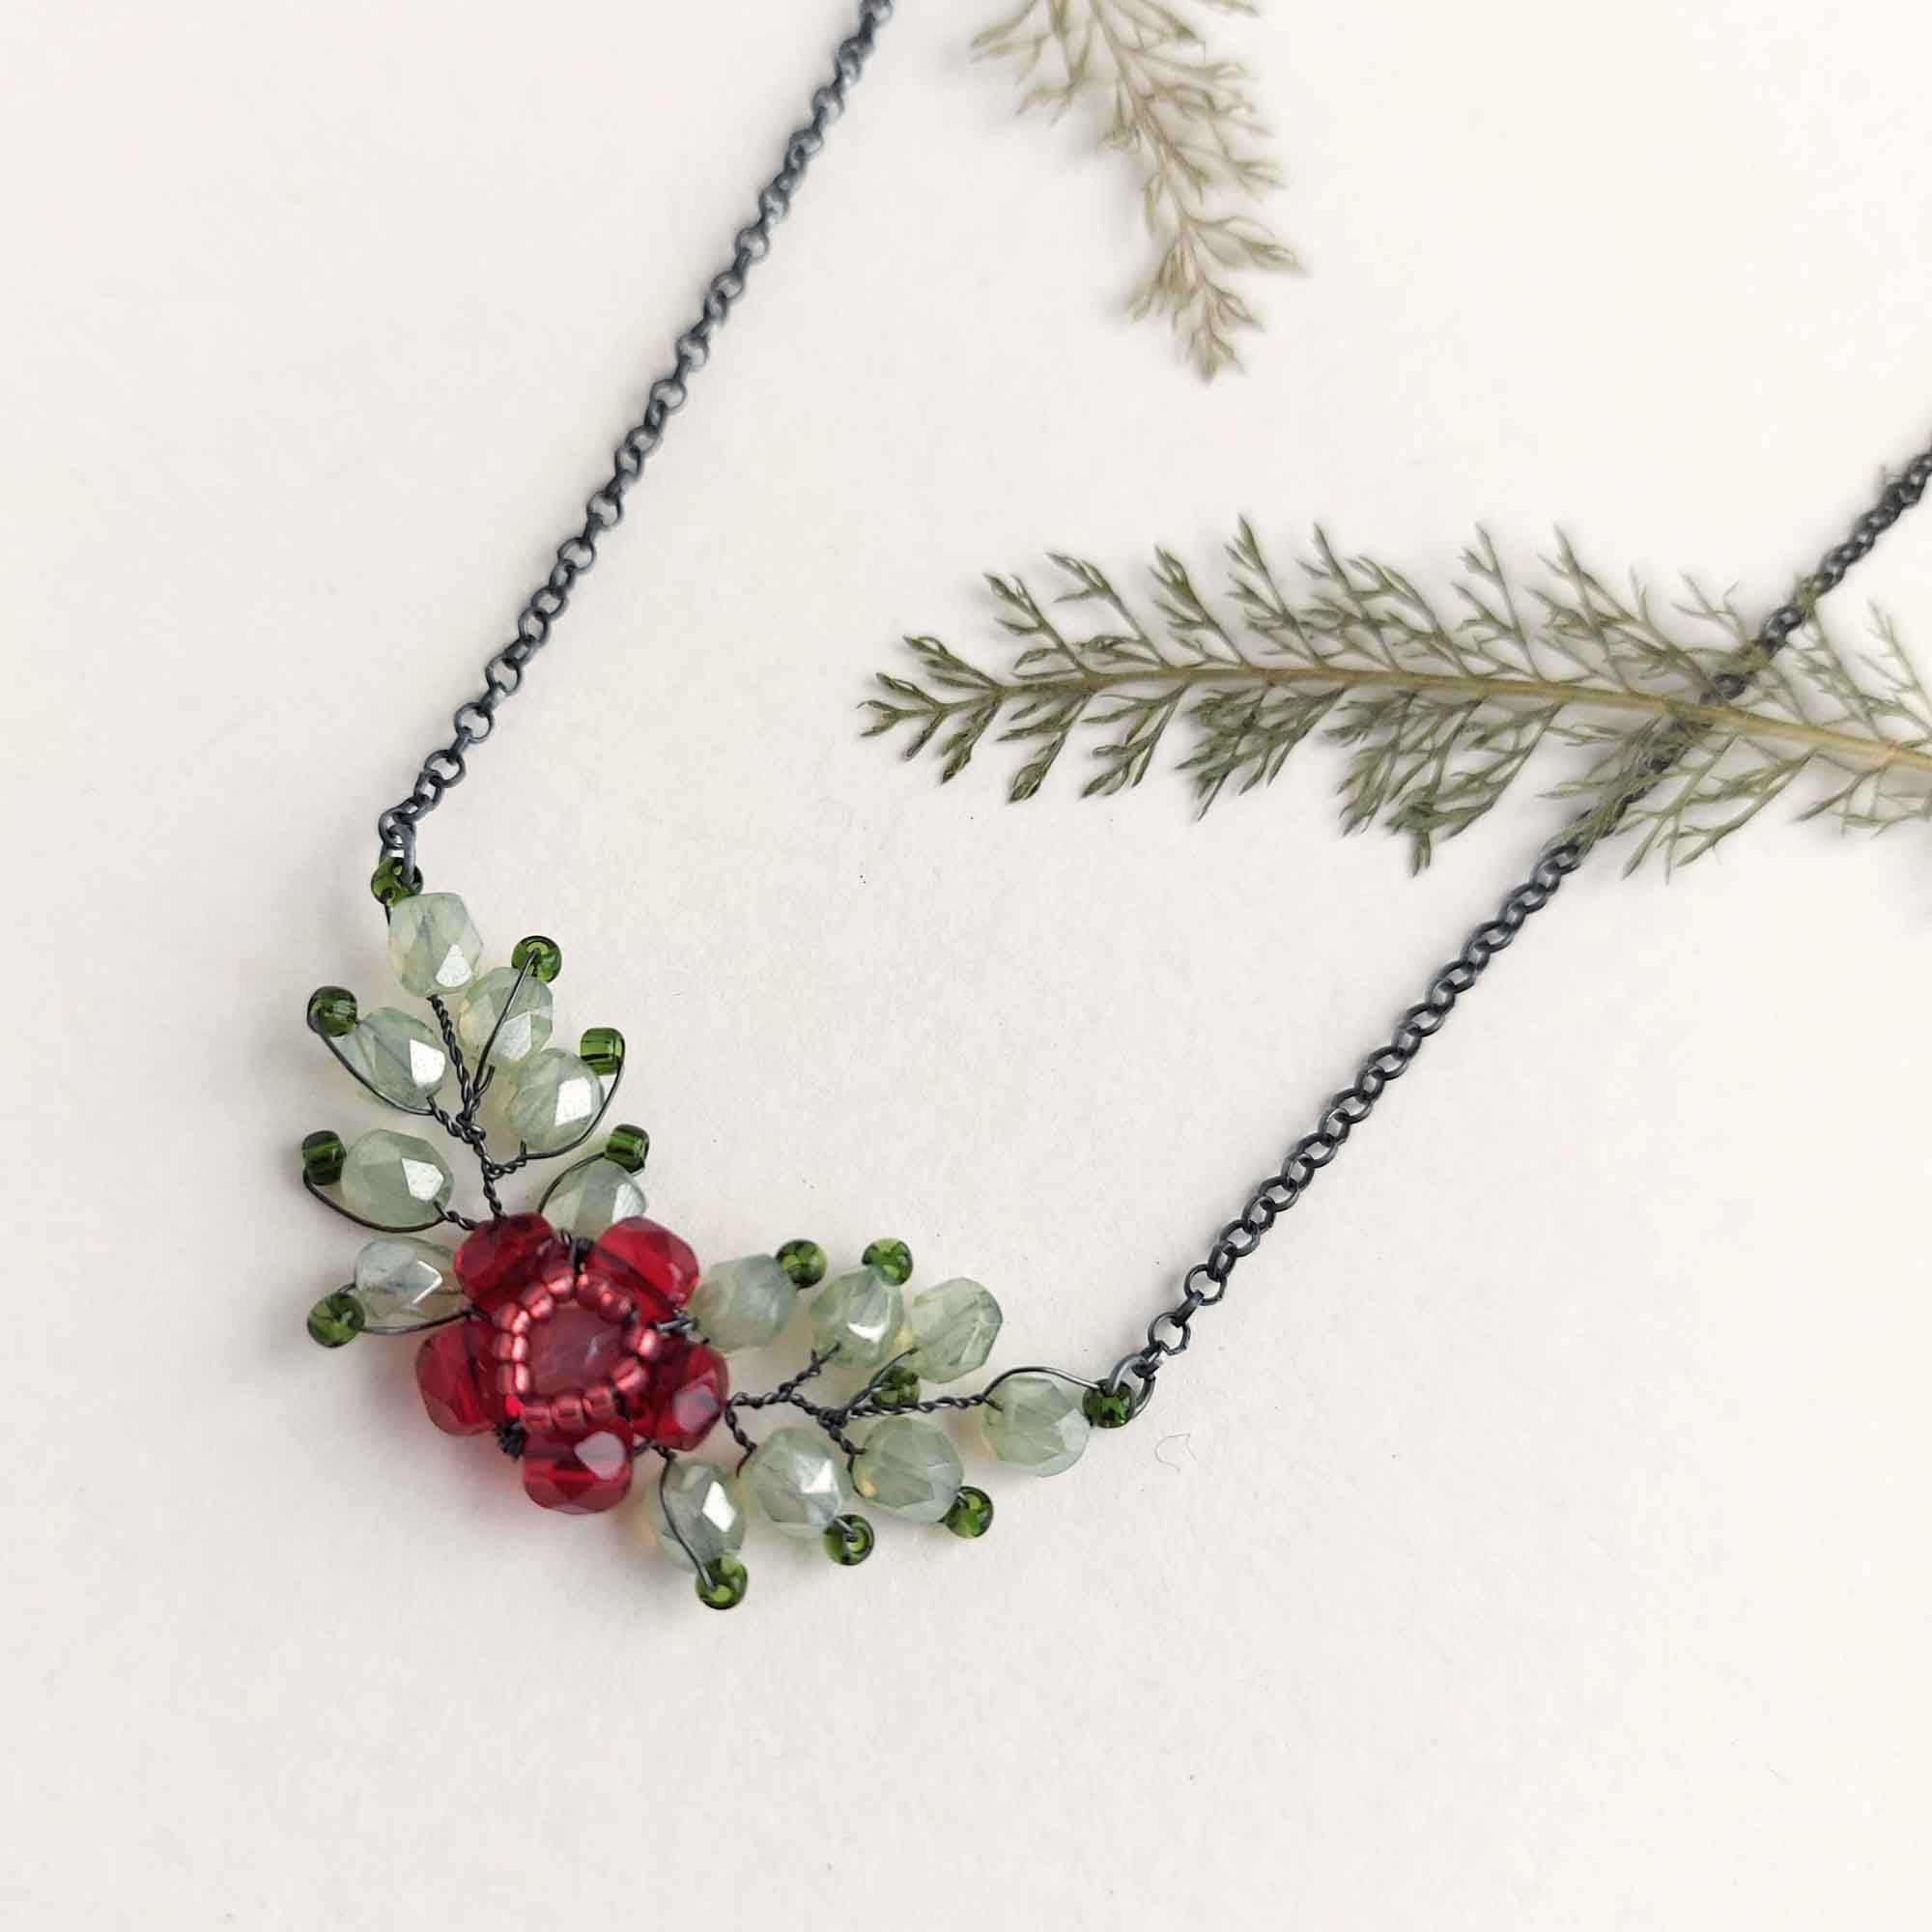 Beaded silver leaf and flower necklace in red and green